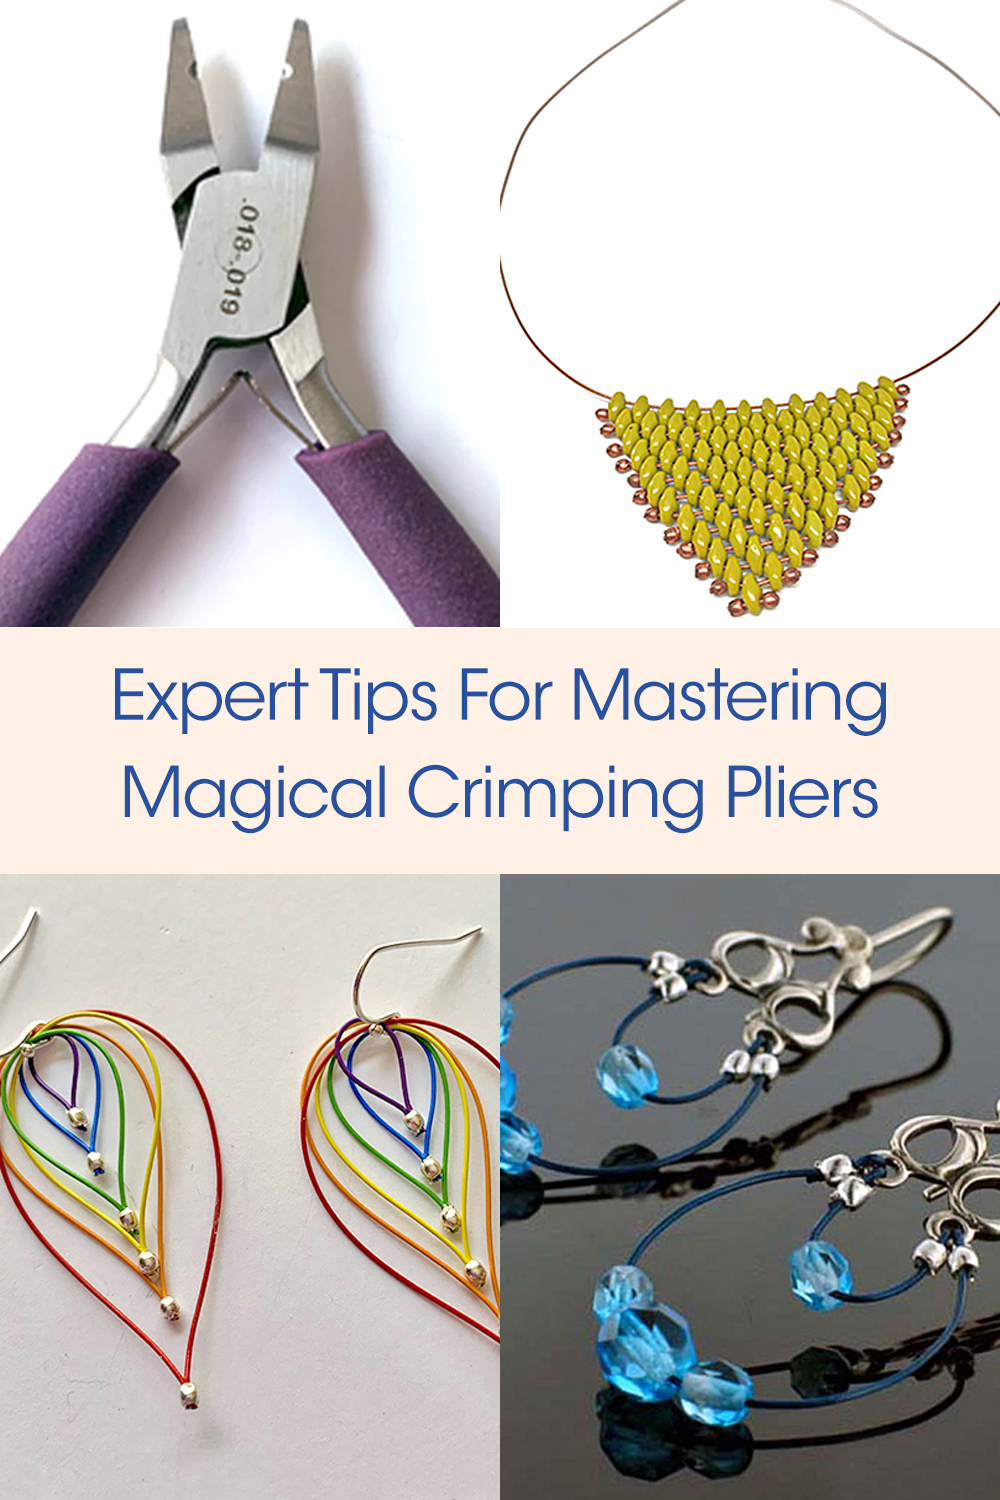 Expert Tips For Mastering Magical Crimping Pliers - Soft Flex Company